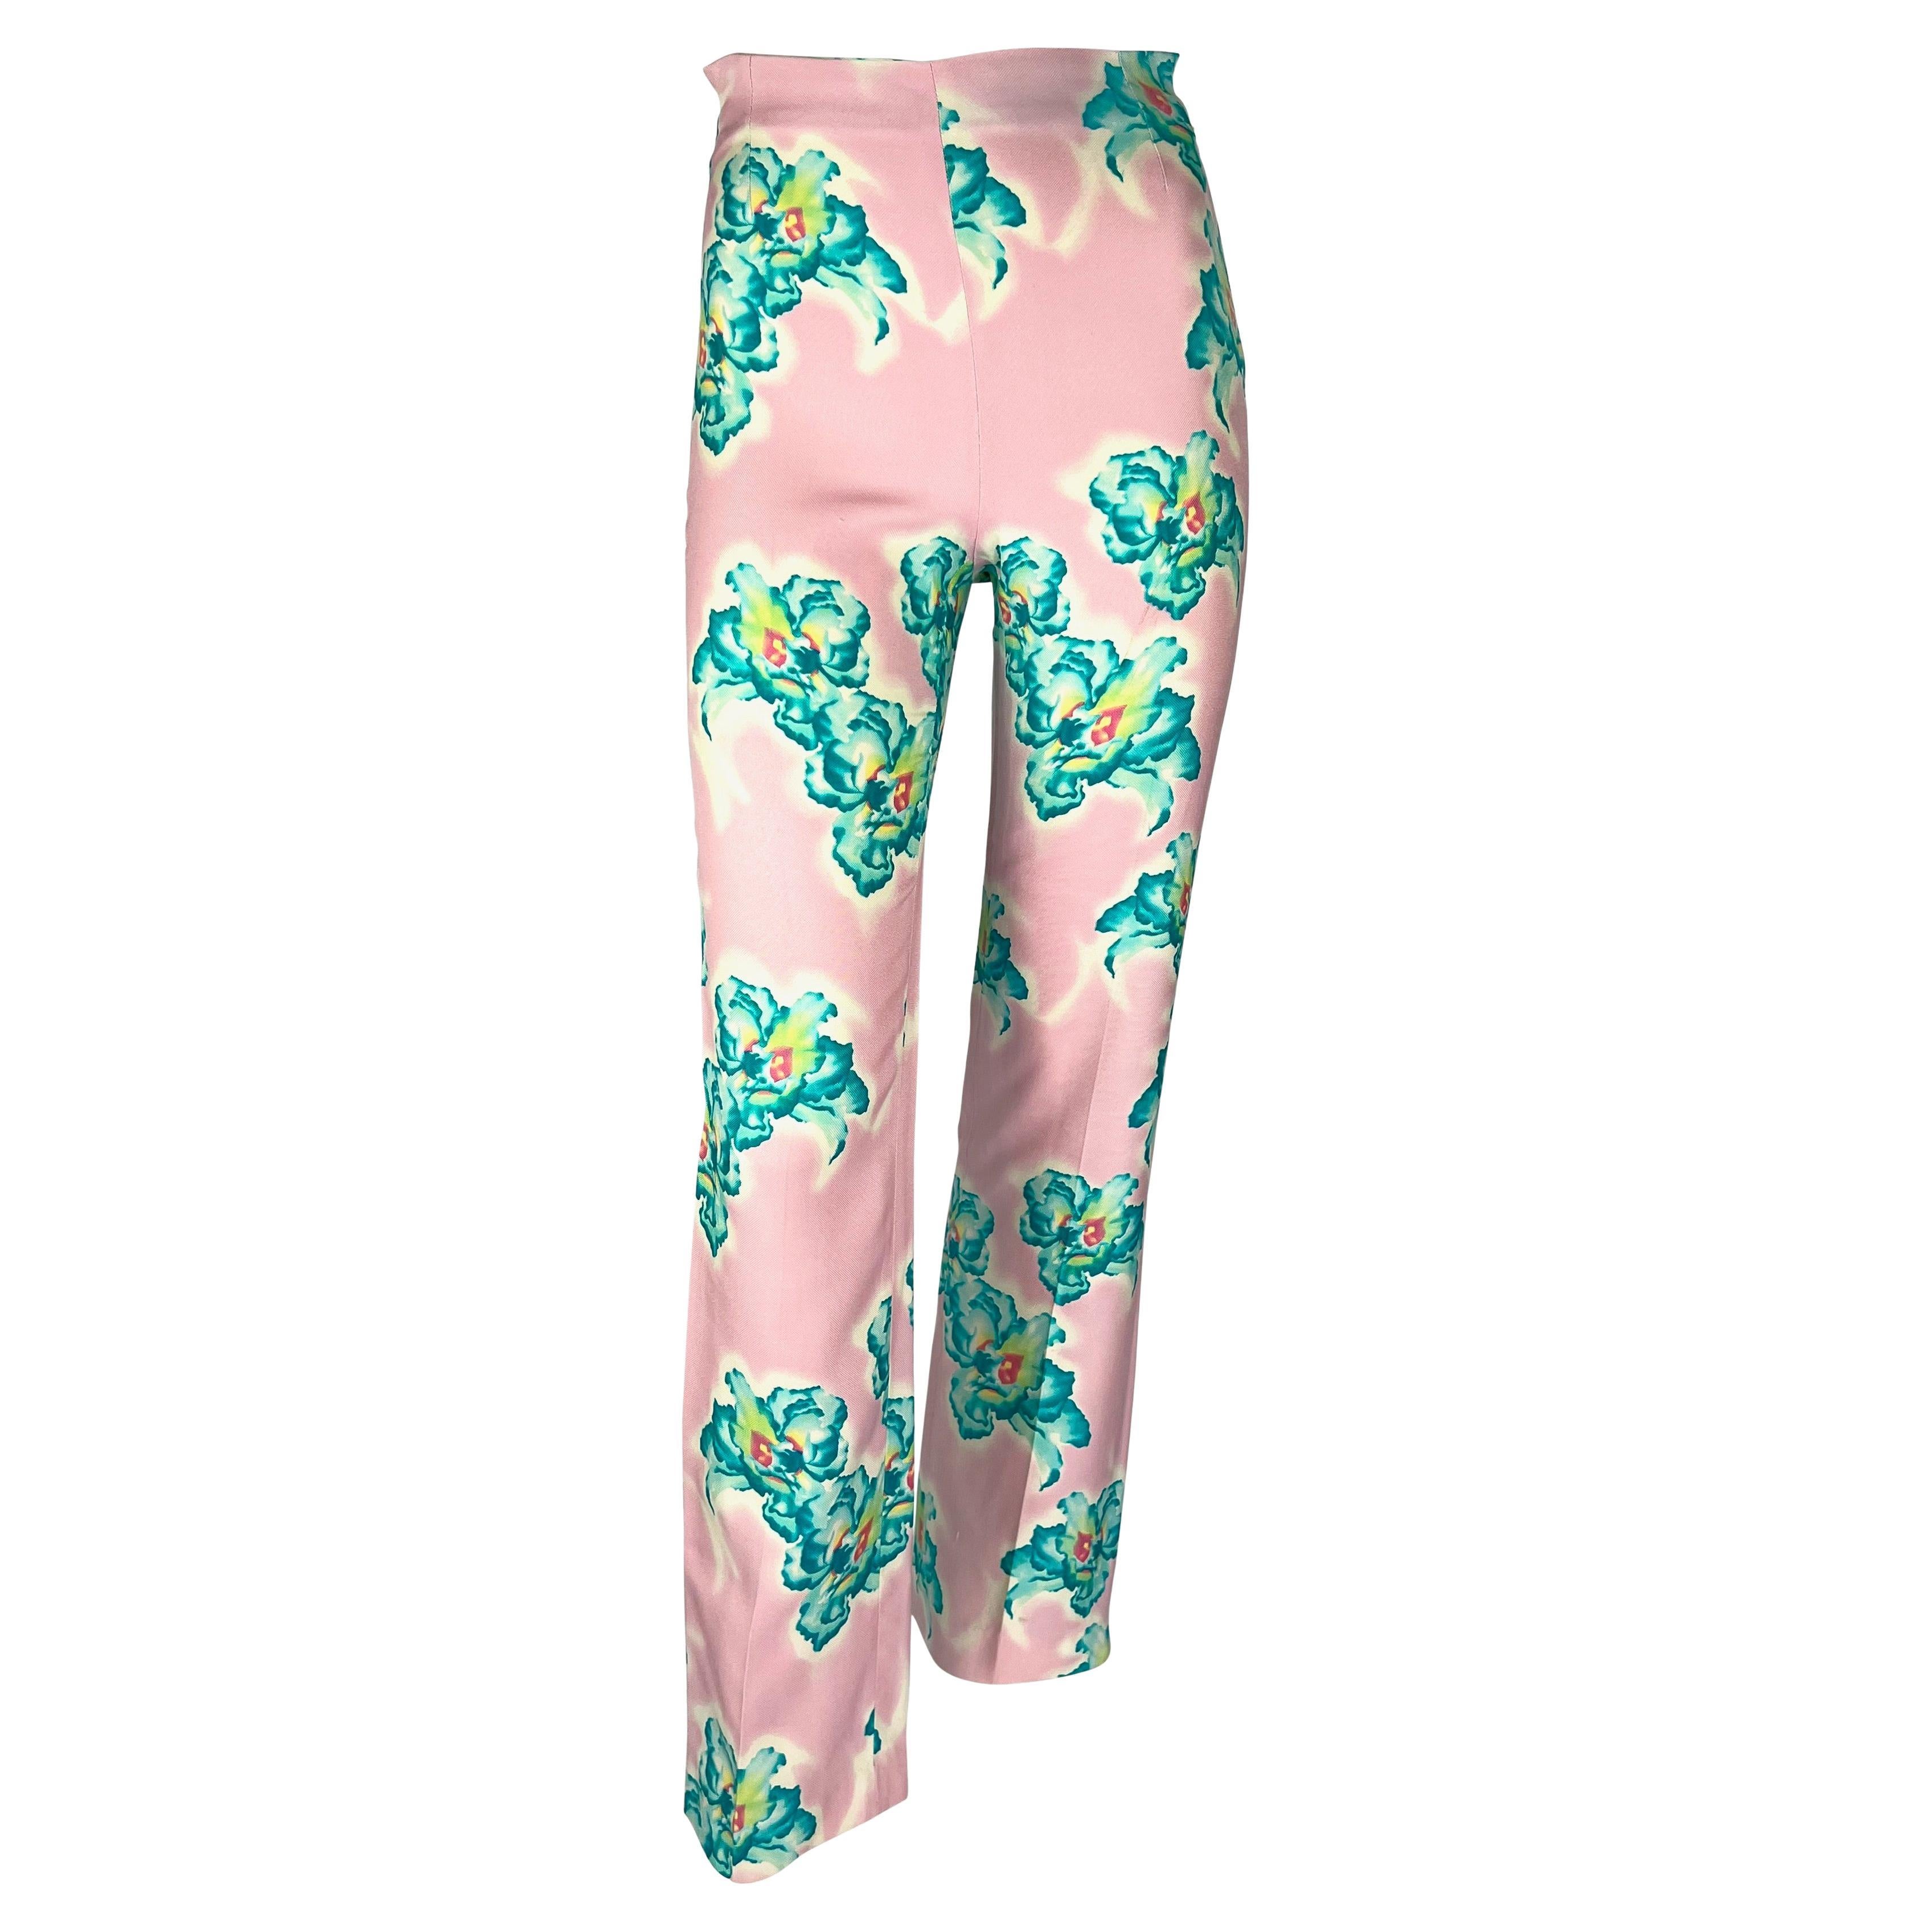 S/S 1999 Gianni Versace by Donatella Pink Blue Orchid Print Silk Cropped Pants For Sale